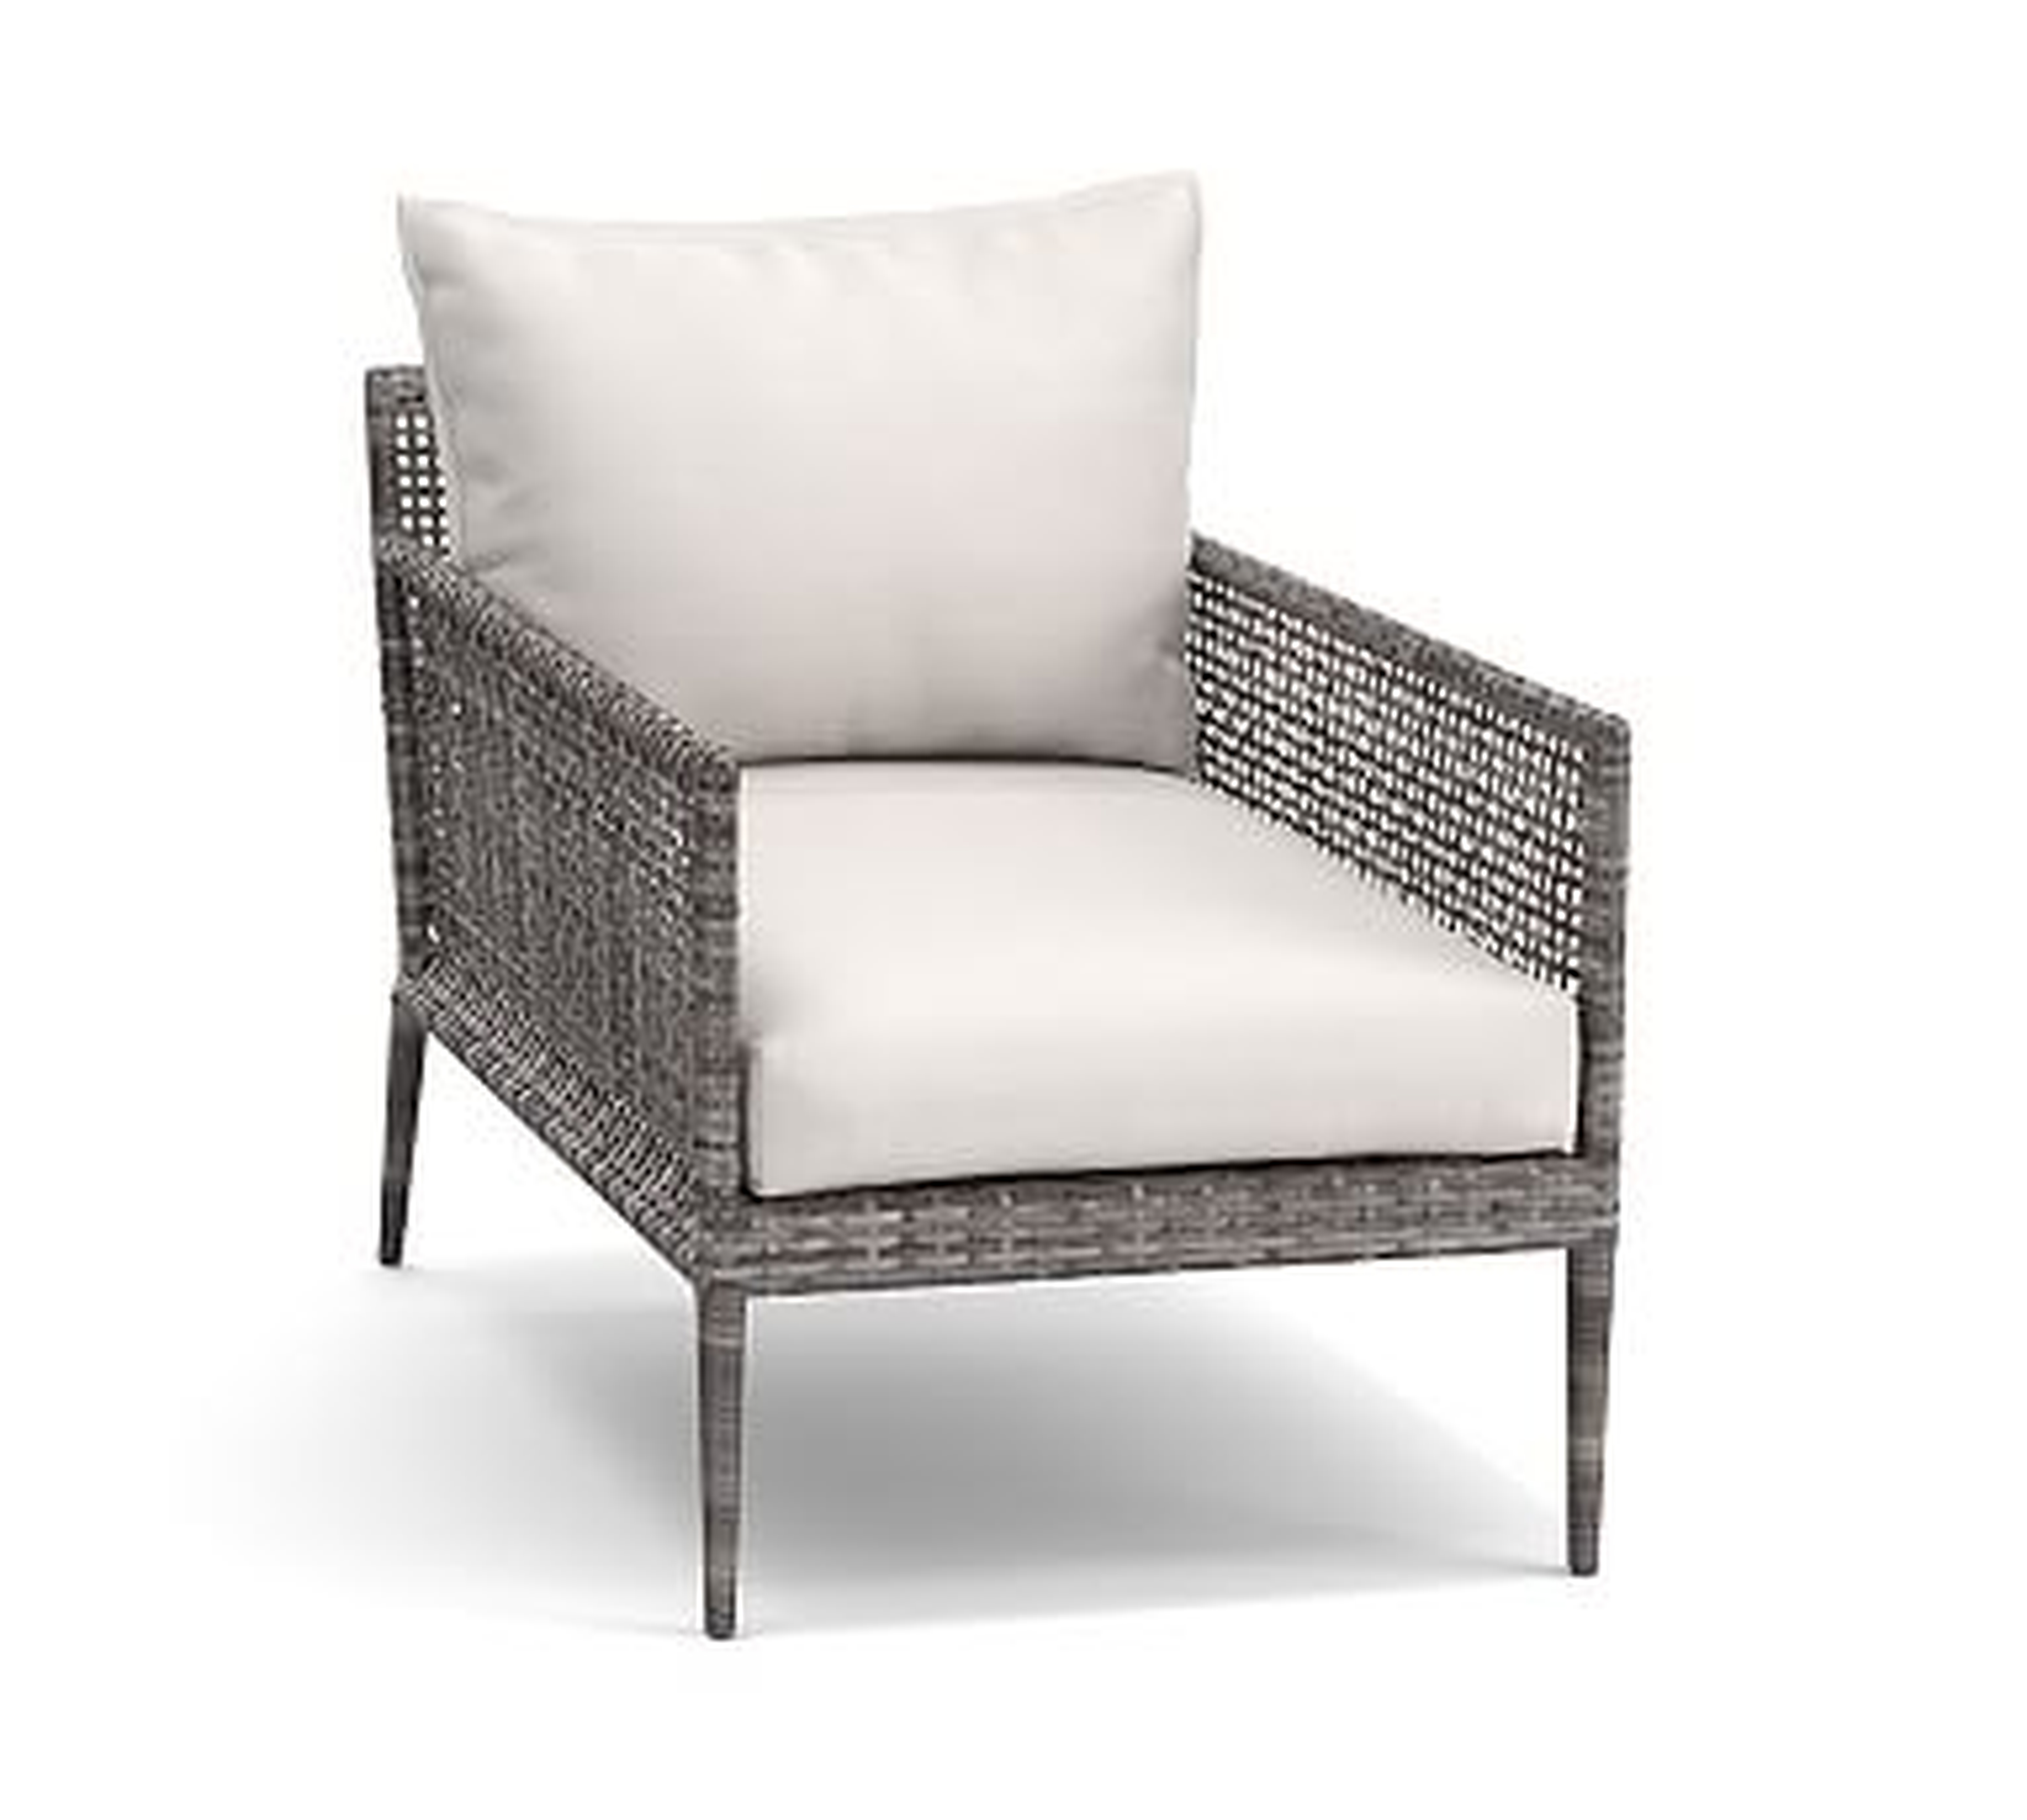 Cammeray All-Weather Wicker Outdoor Lounge Chair with Cushion, Gray - Pottery Barn